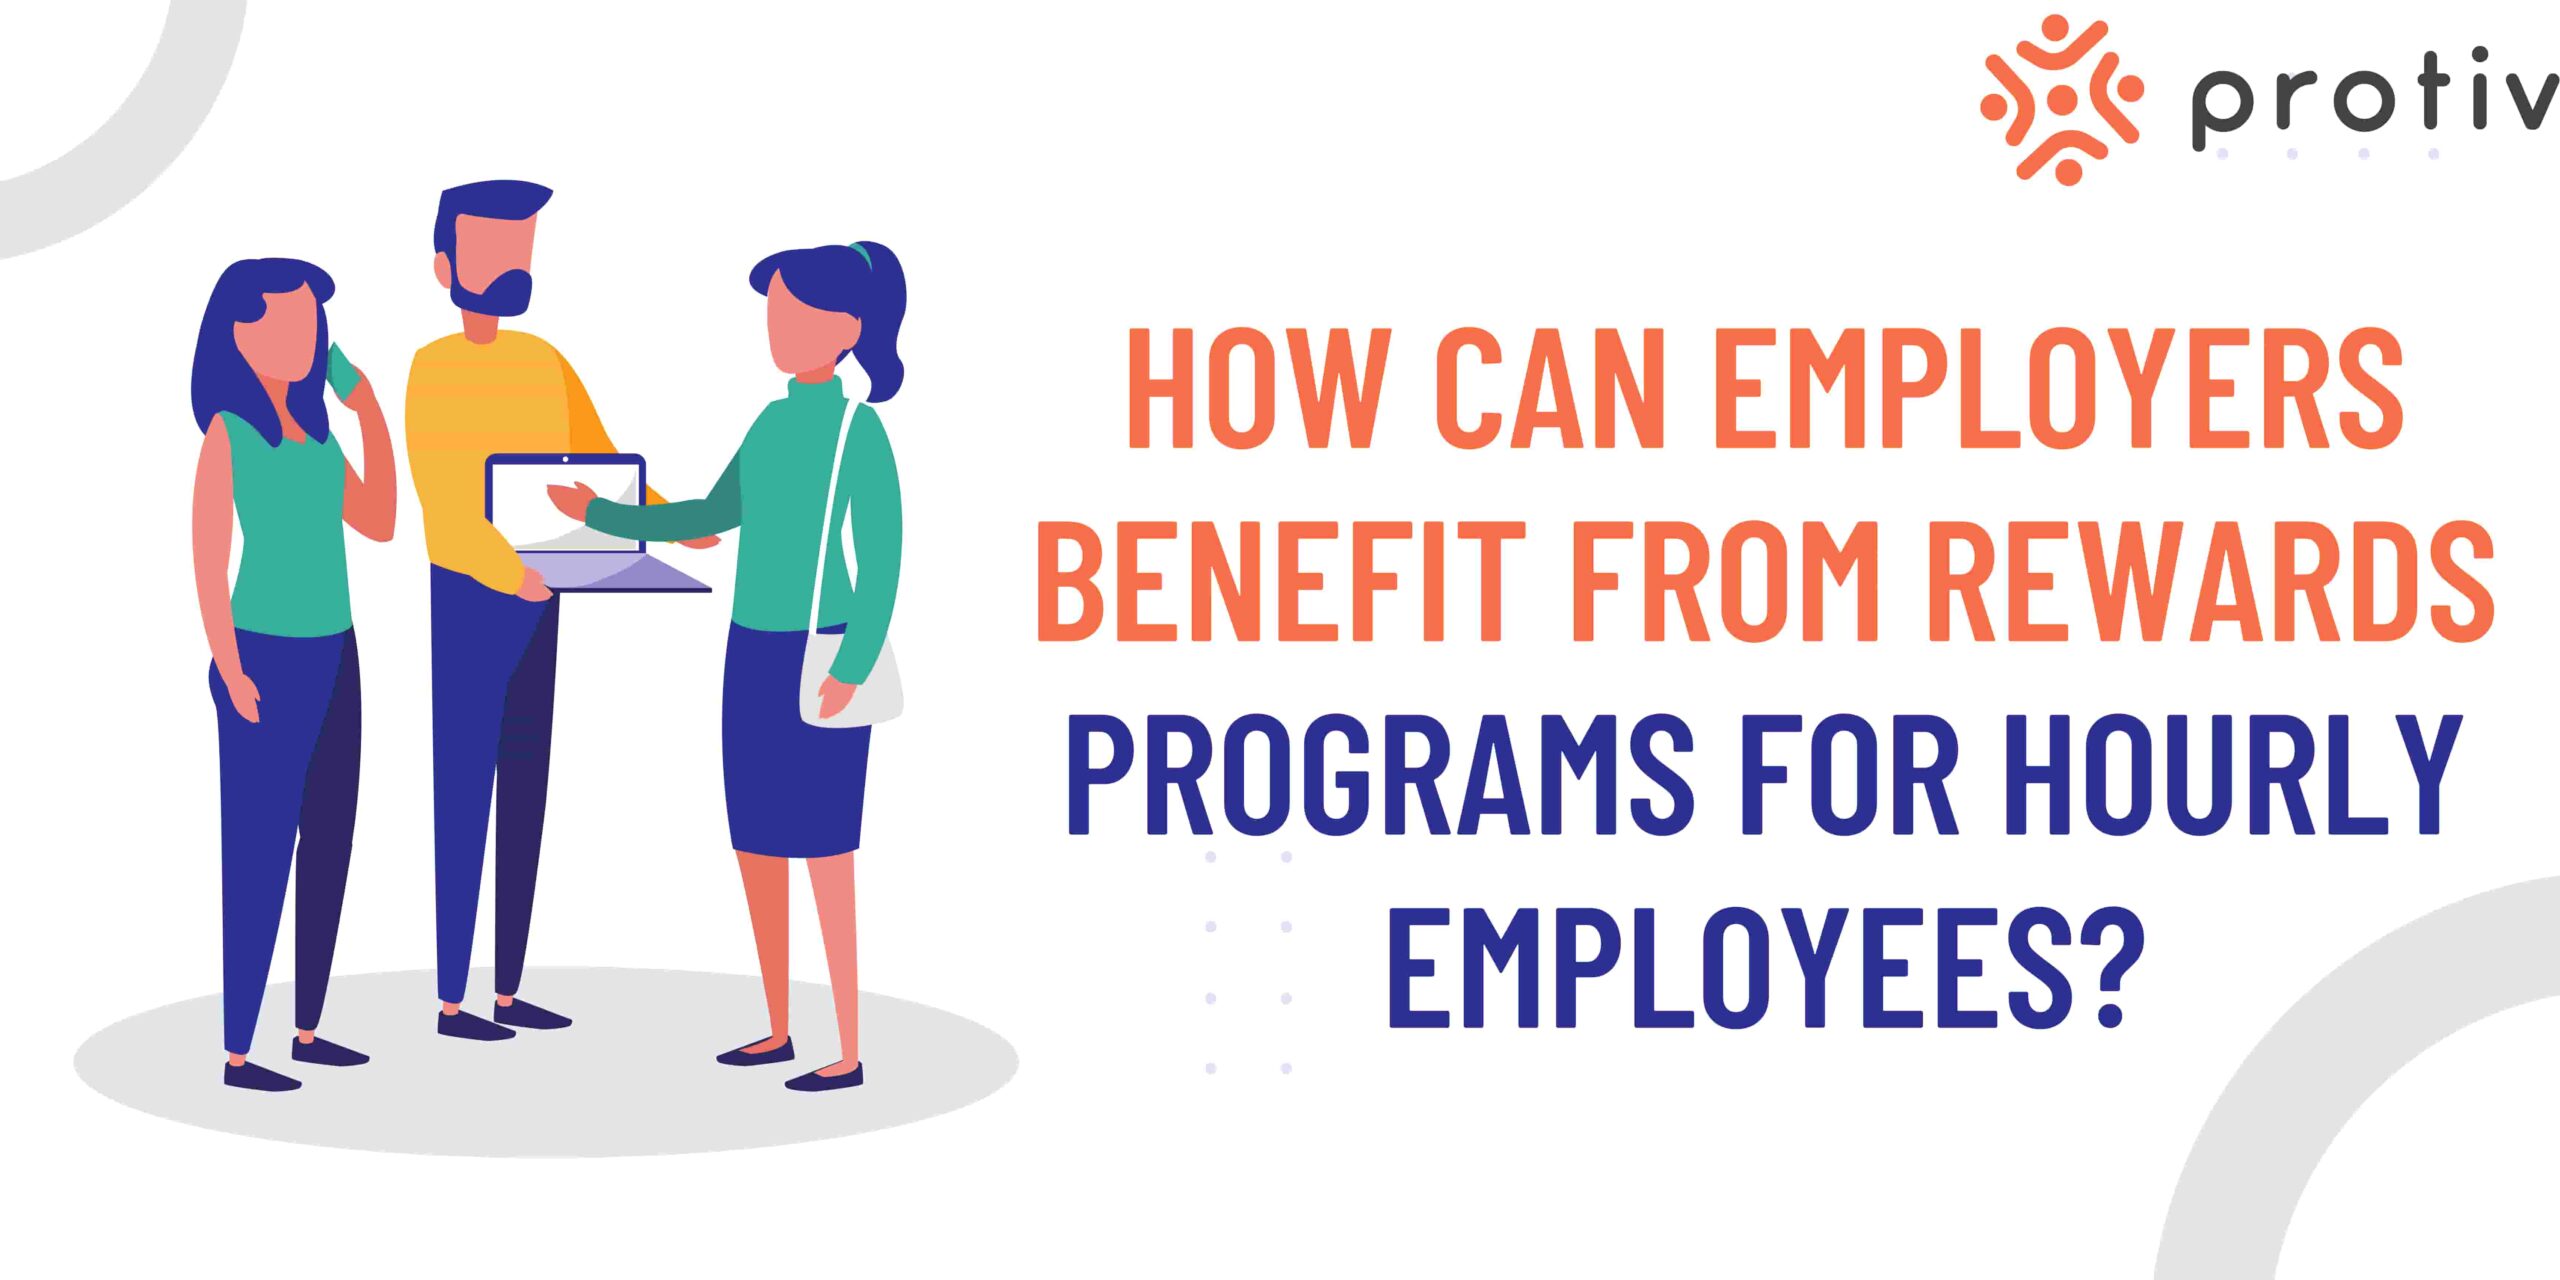 Employers Benefit From Rewards Programs For Hourly Employees